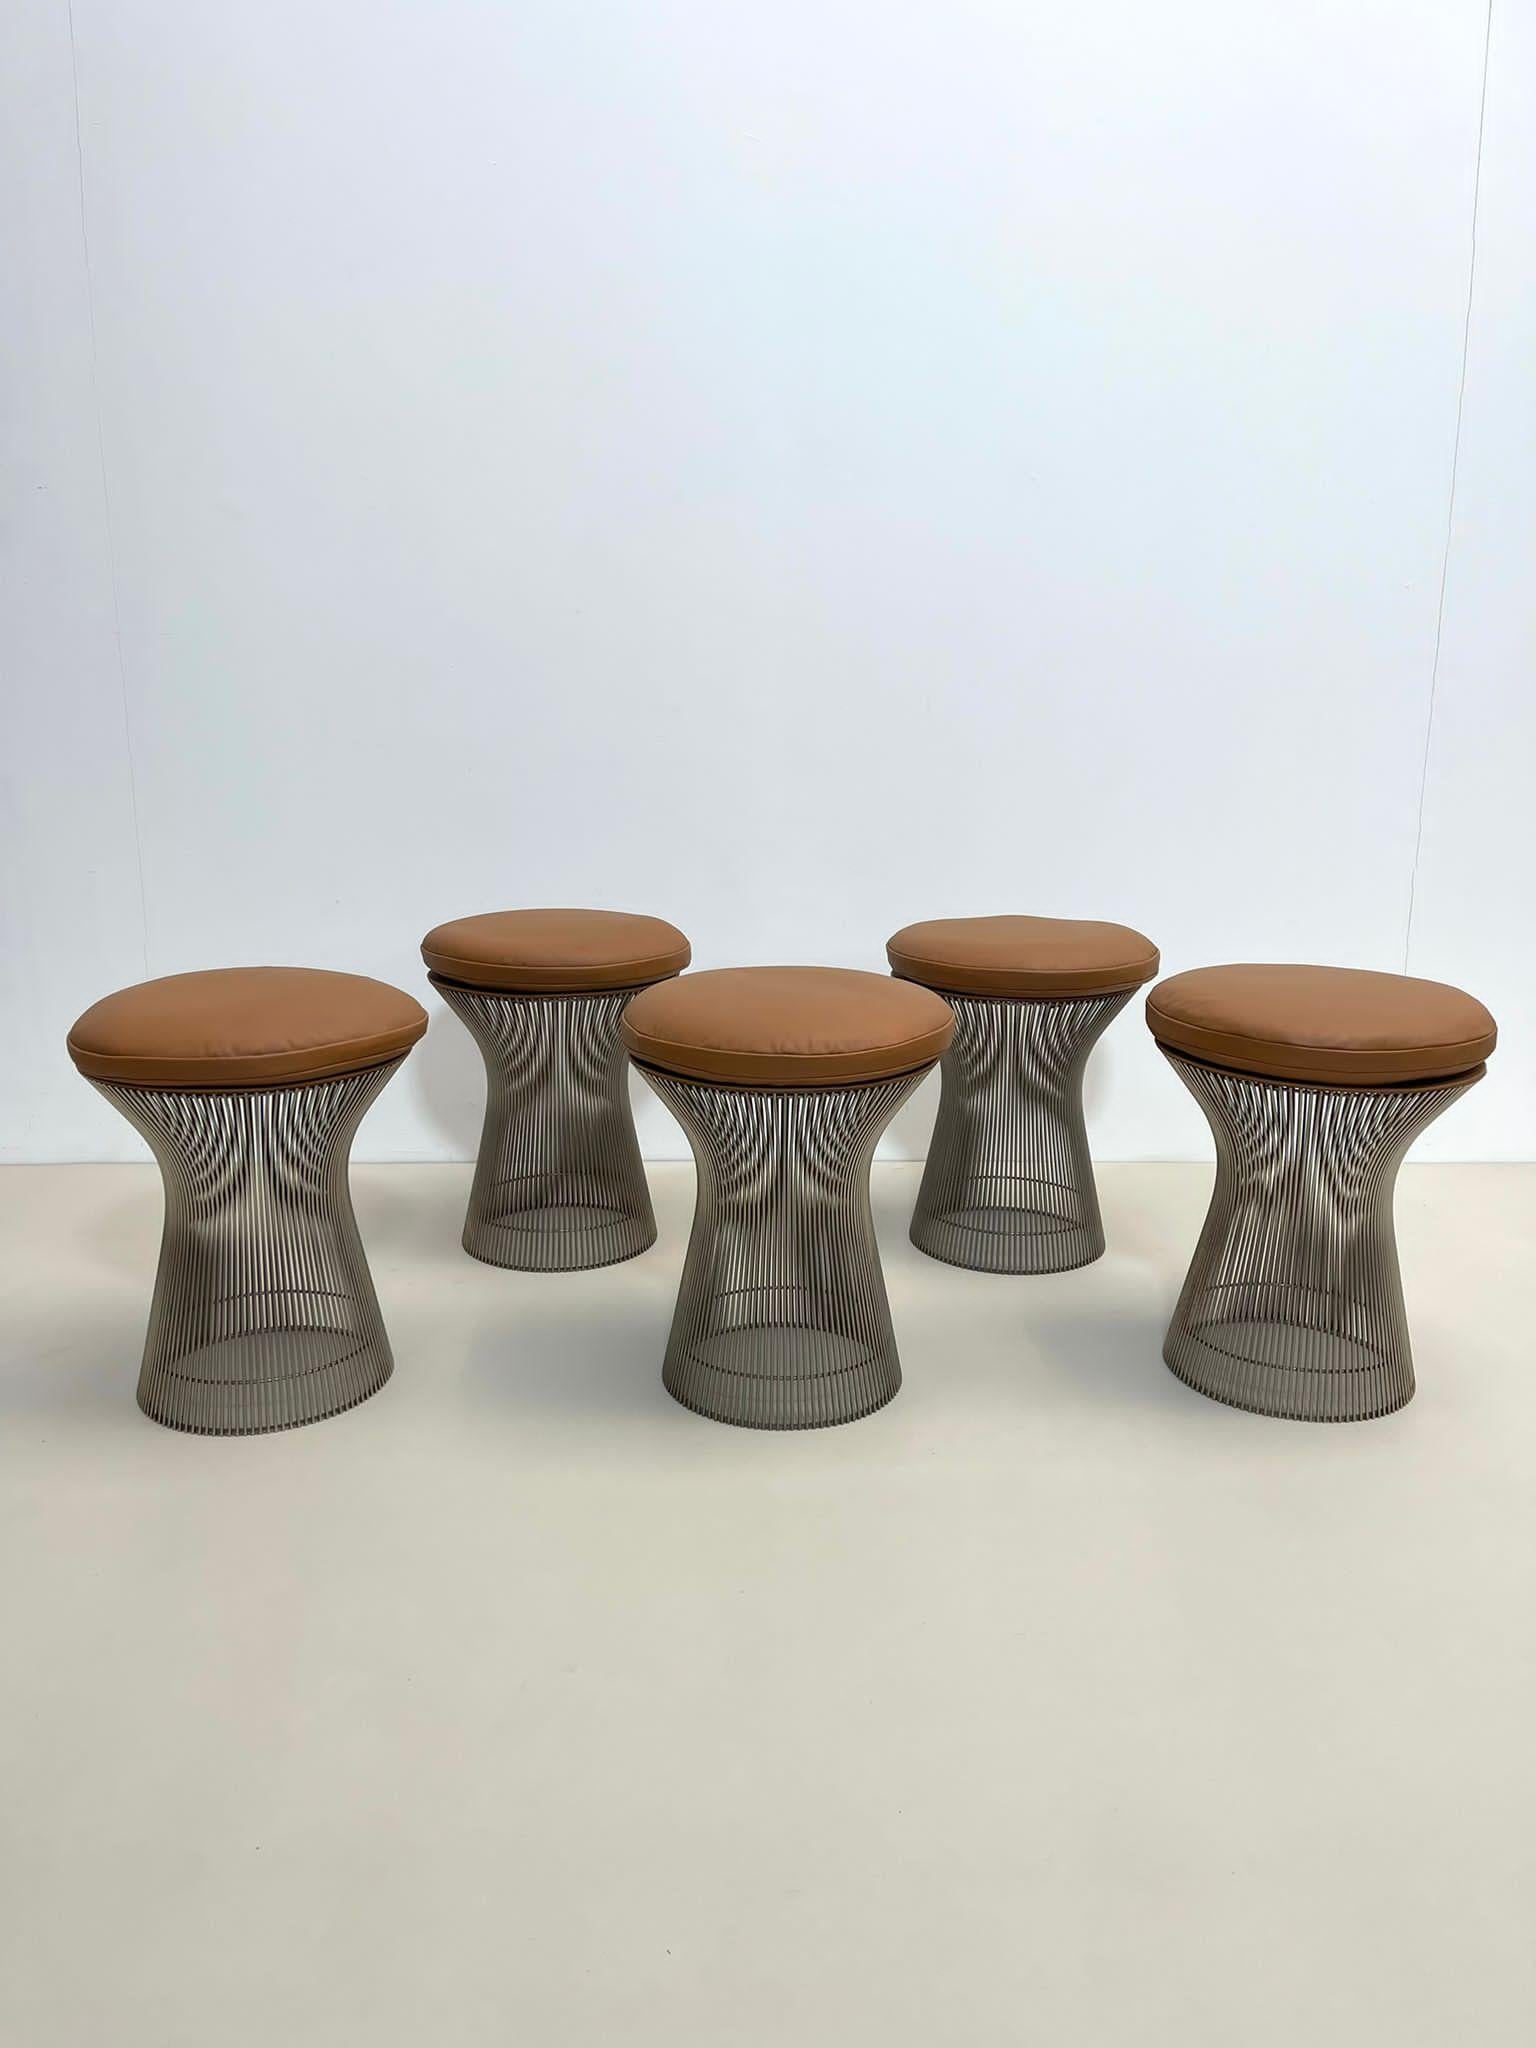 Warren Platner wire stools for Knoll, 1960s - 5 Available.